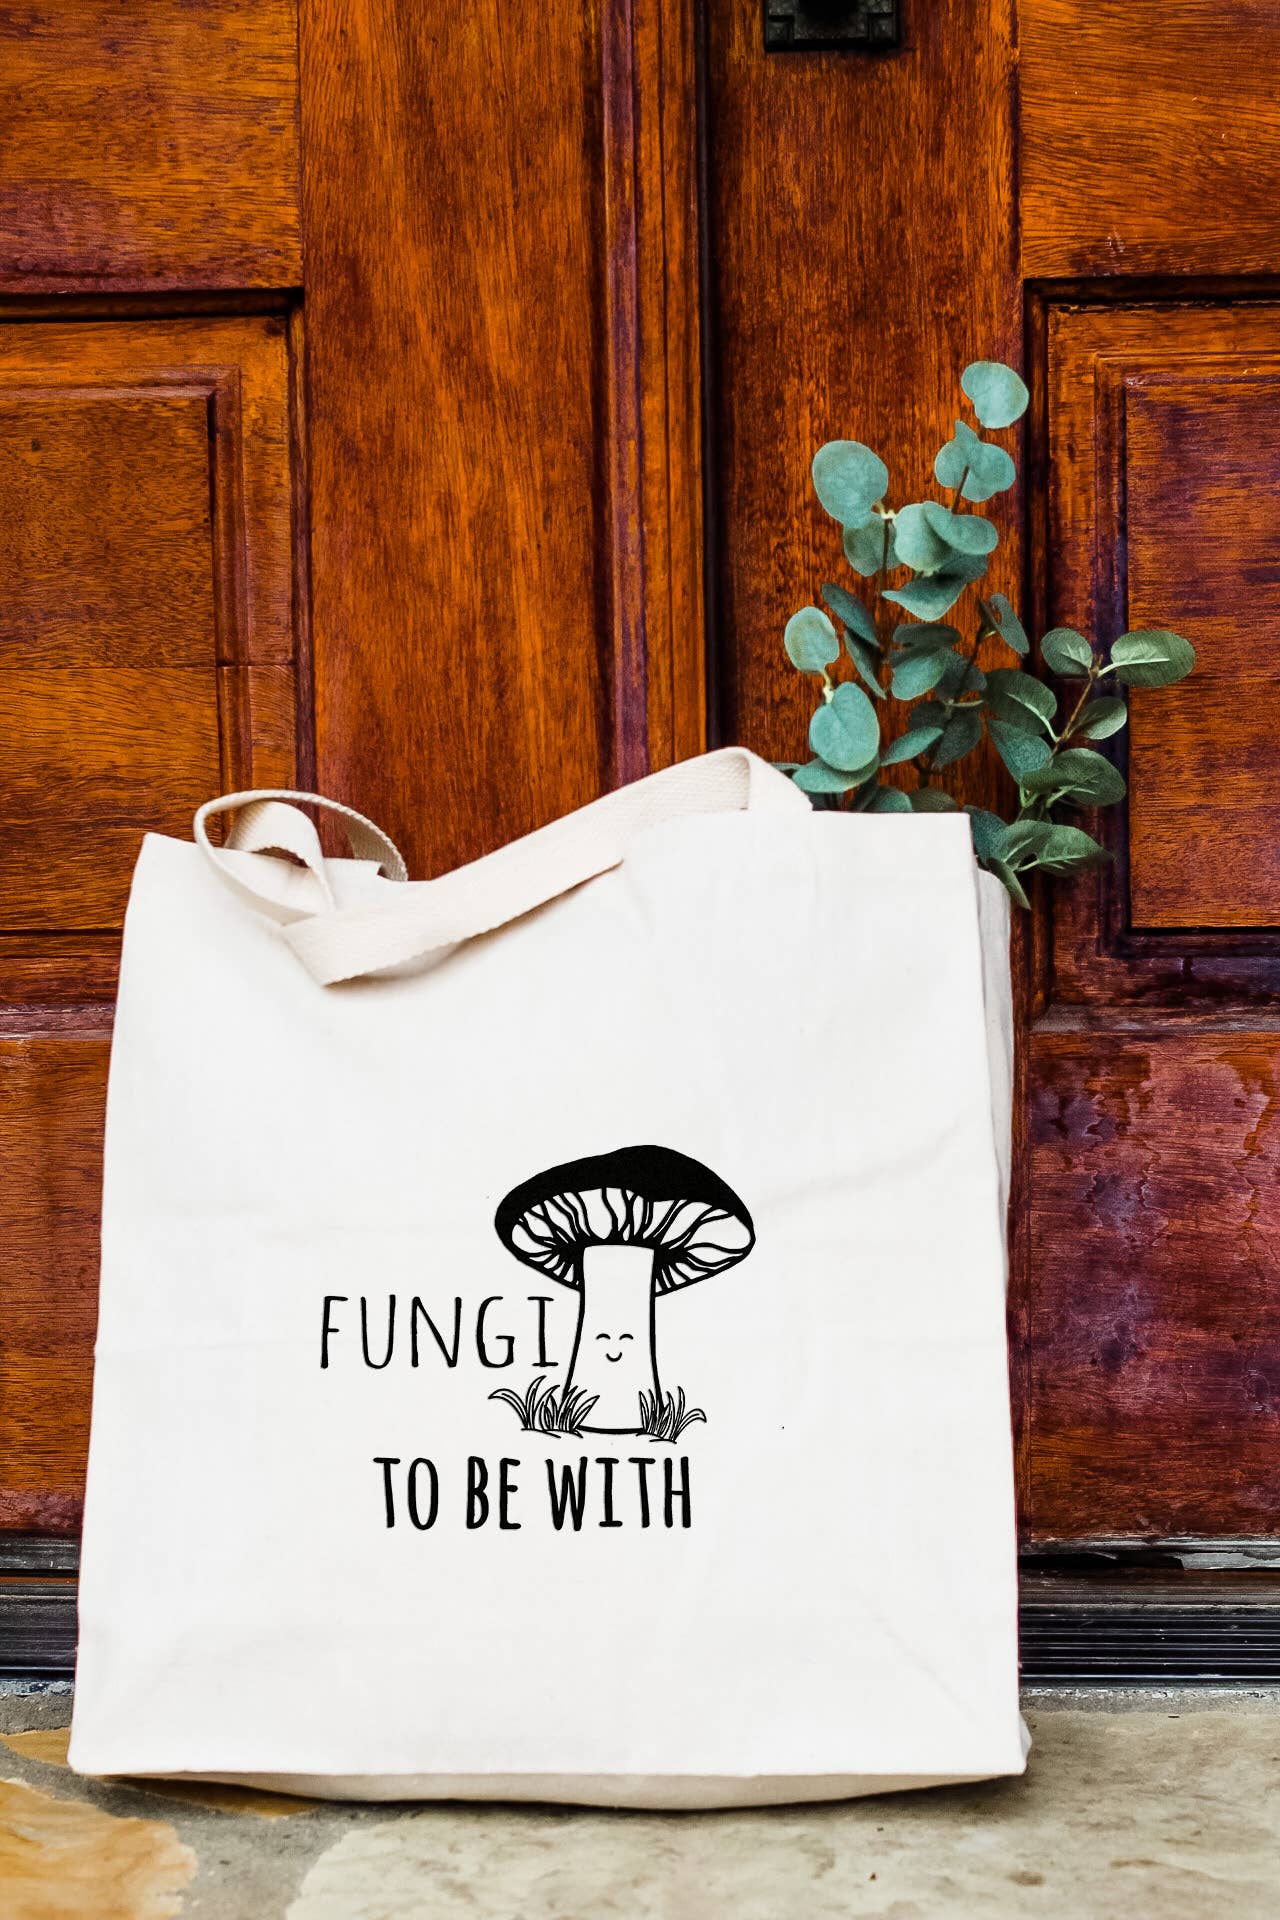 Fungi To Be With - Tote Bags